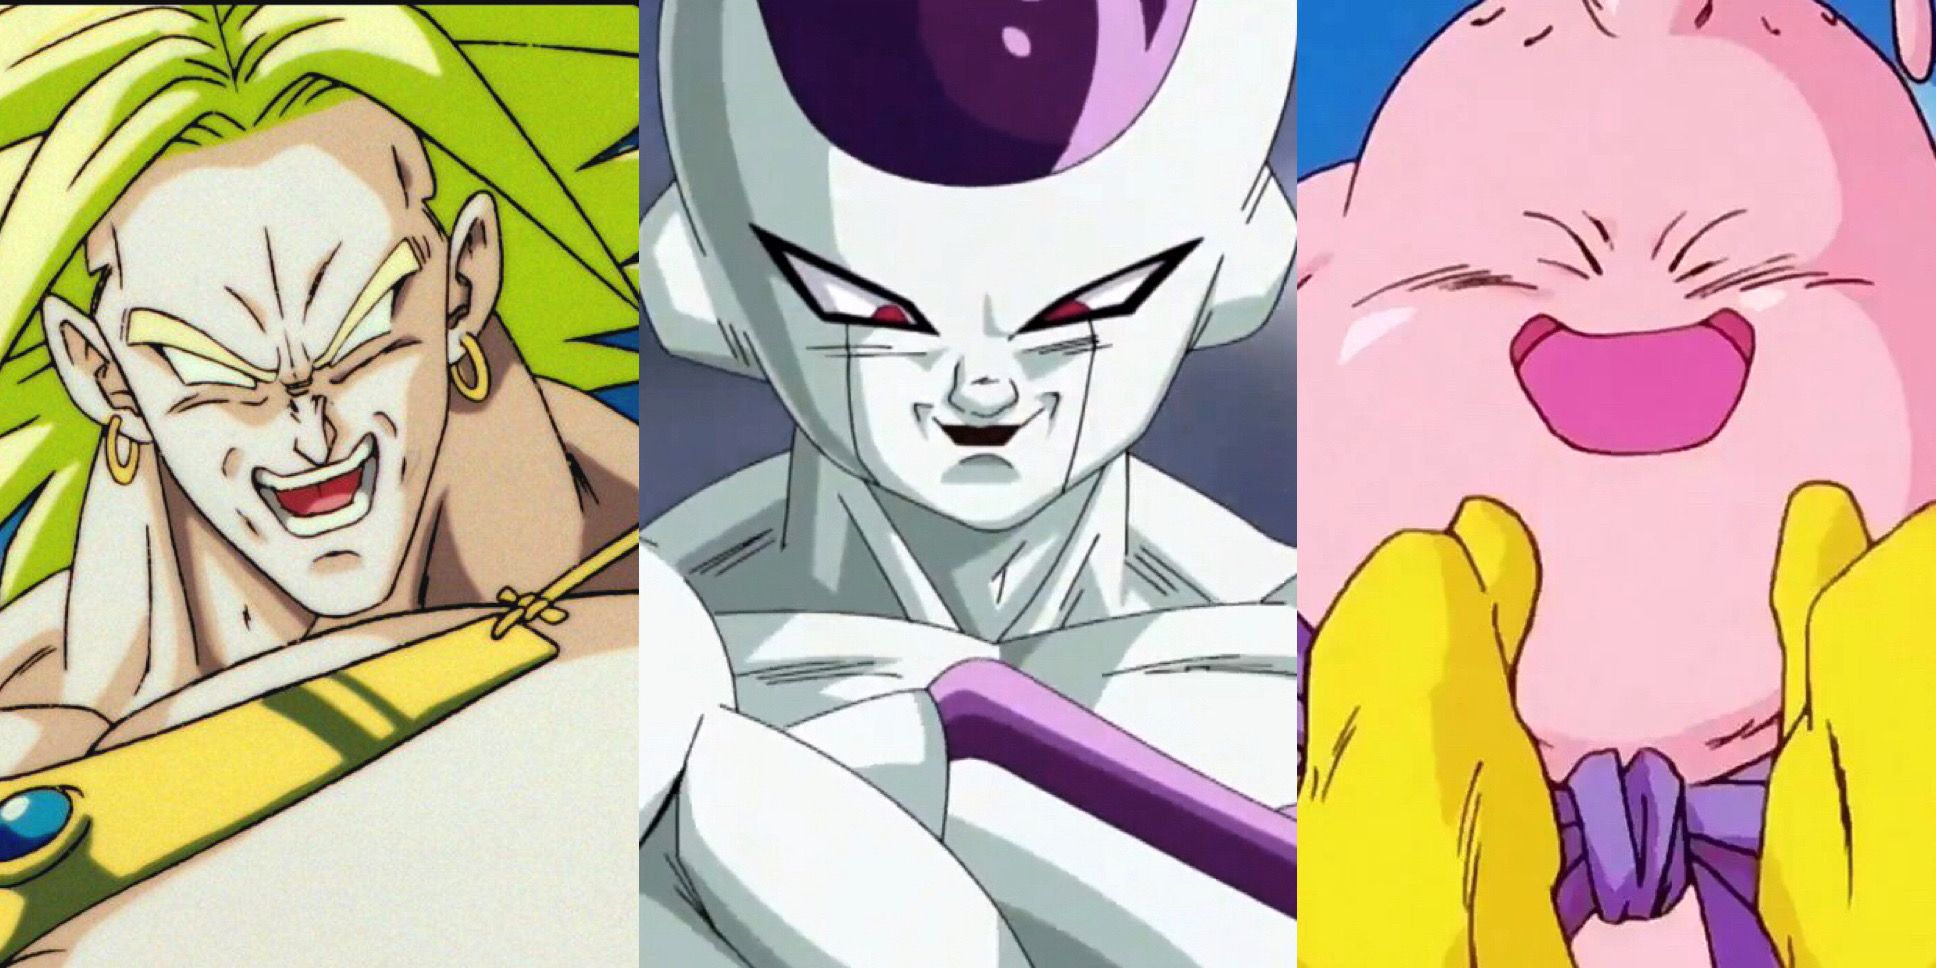 Who made the animation from dragon ball z episodes like goku vs kid buu (ep  279) or goku vs majin vegeta and why did they stop to do this type of  drawing? 